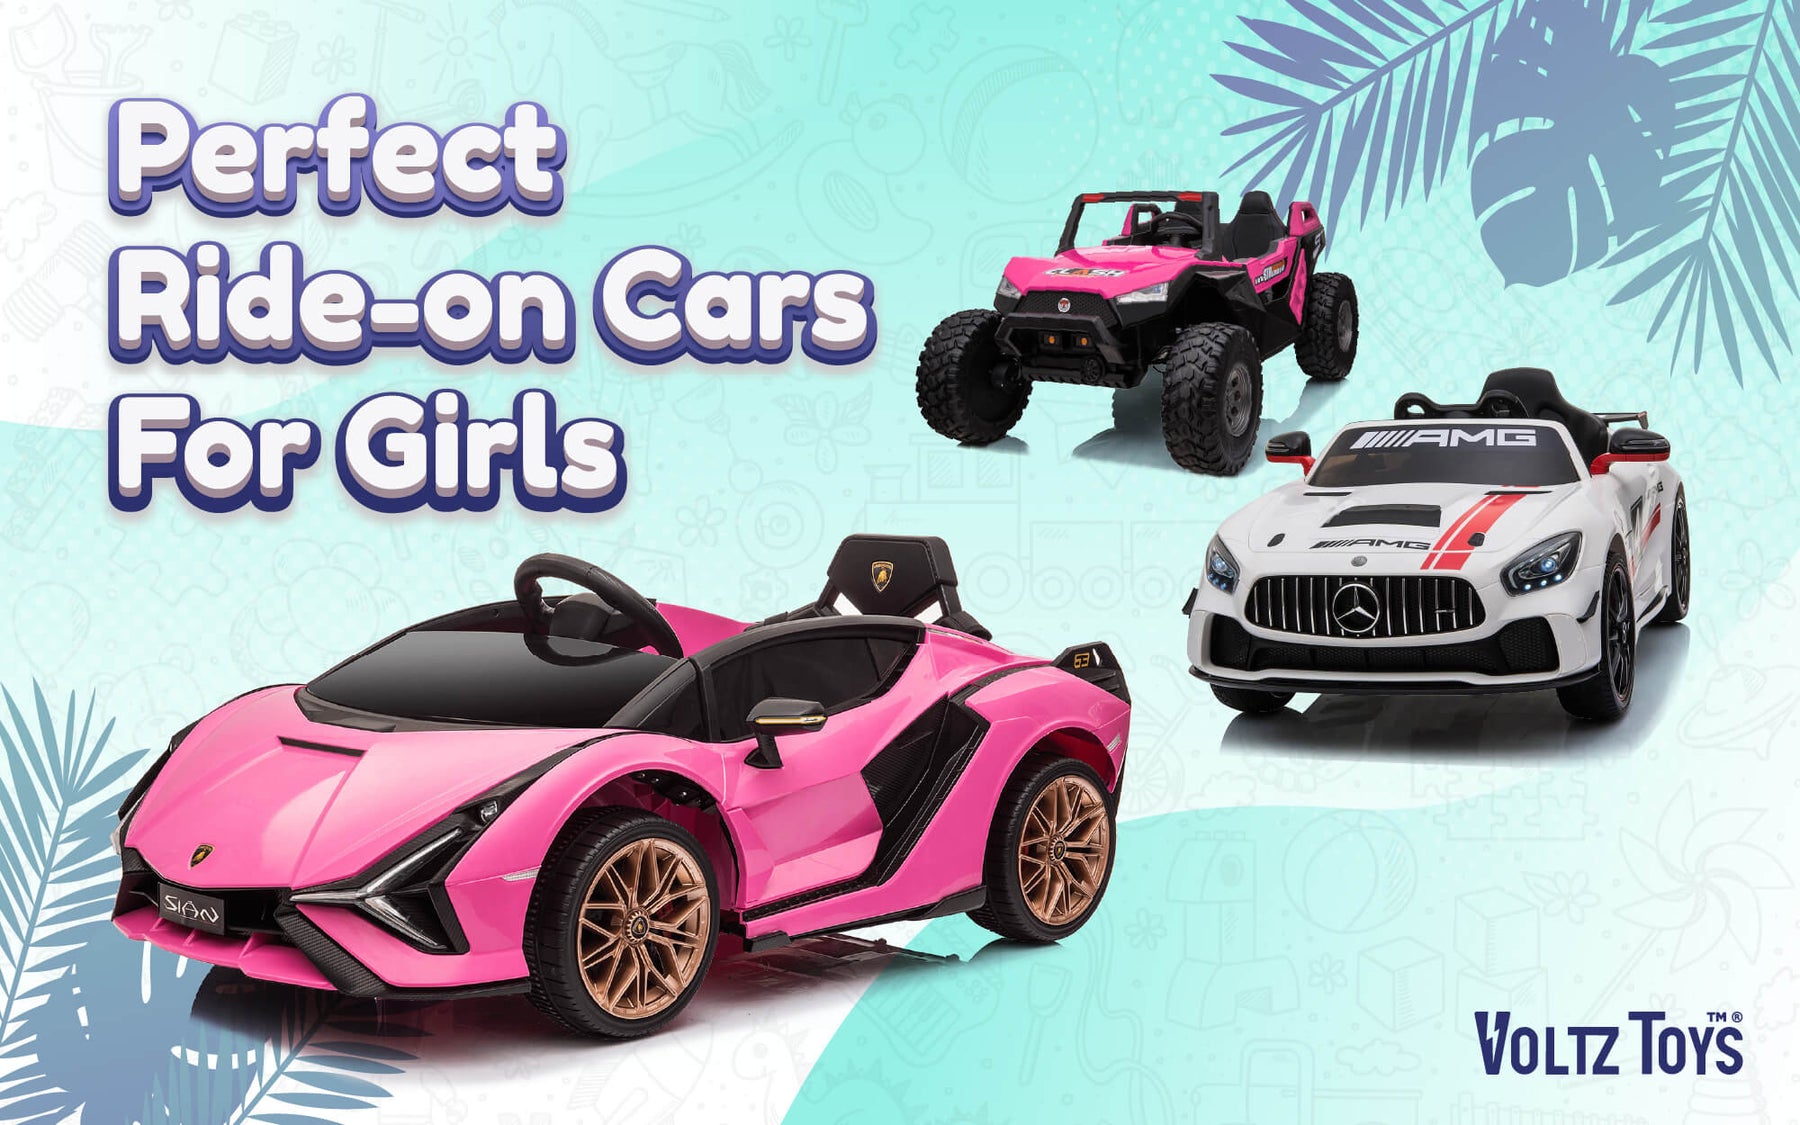 Perfect Ride-On Cars for Girls